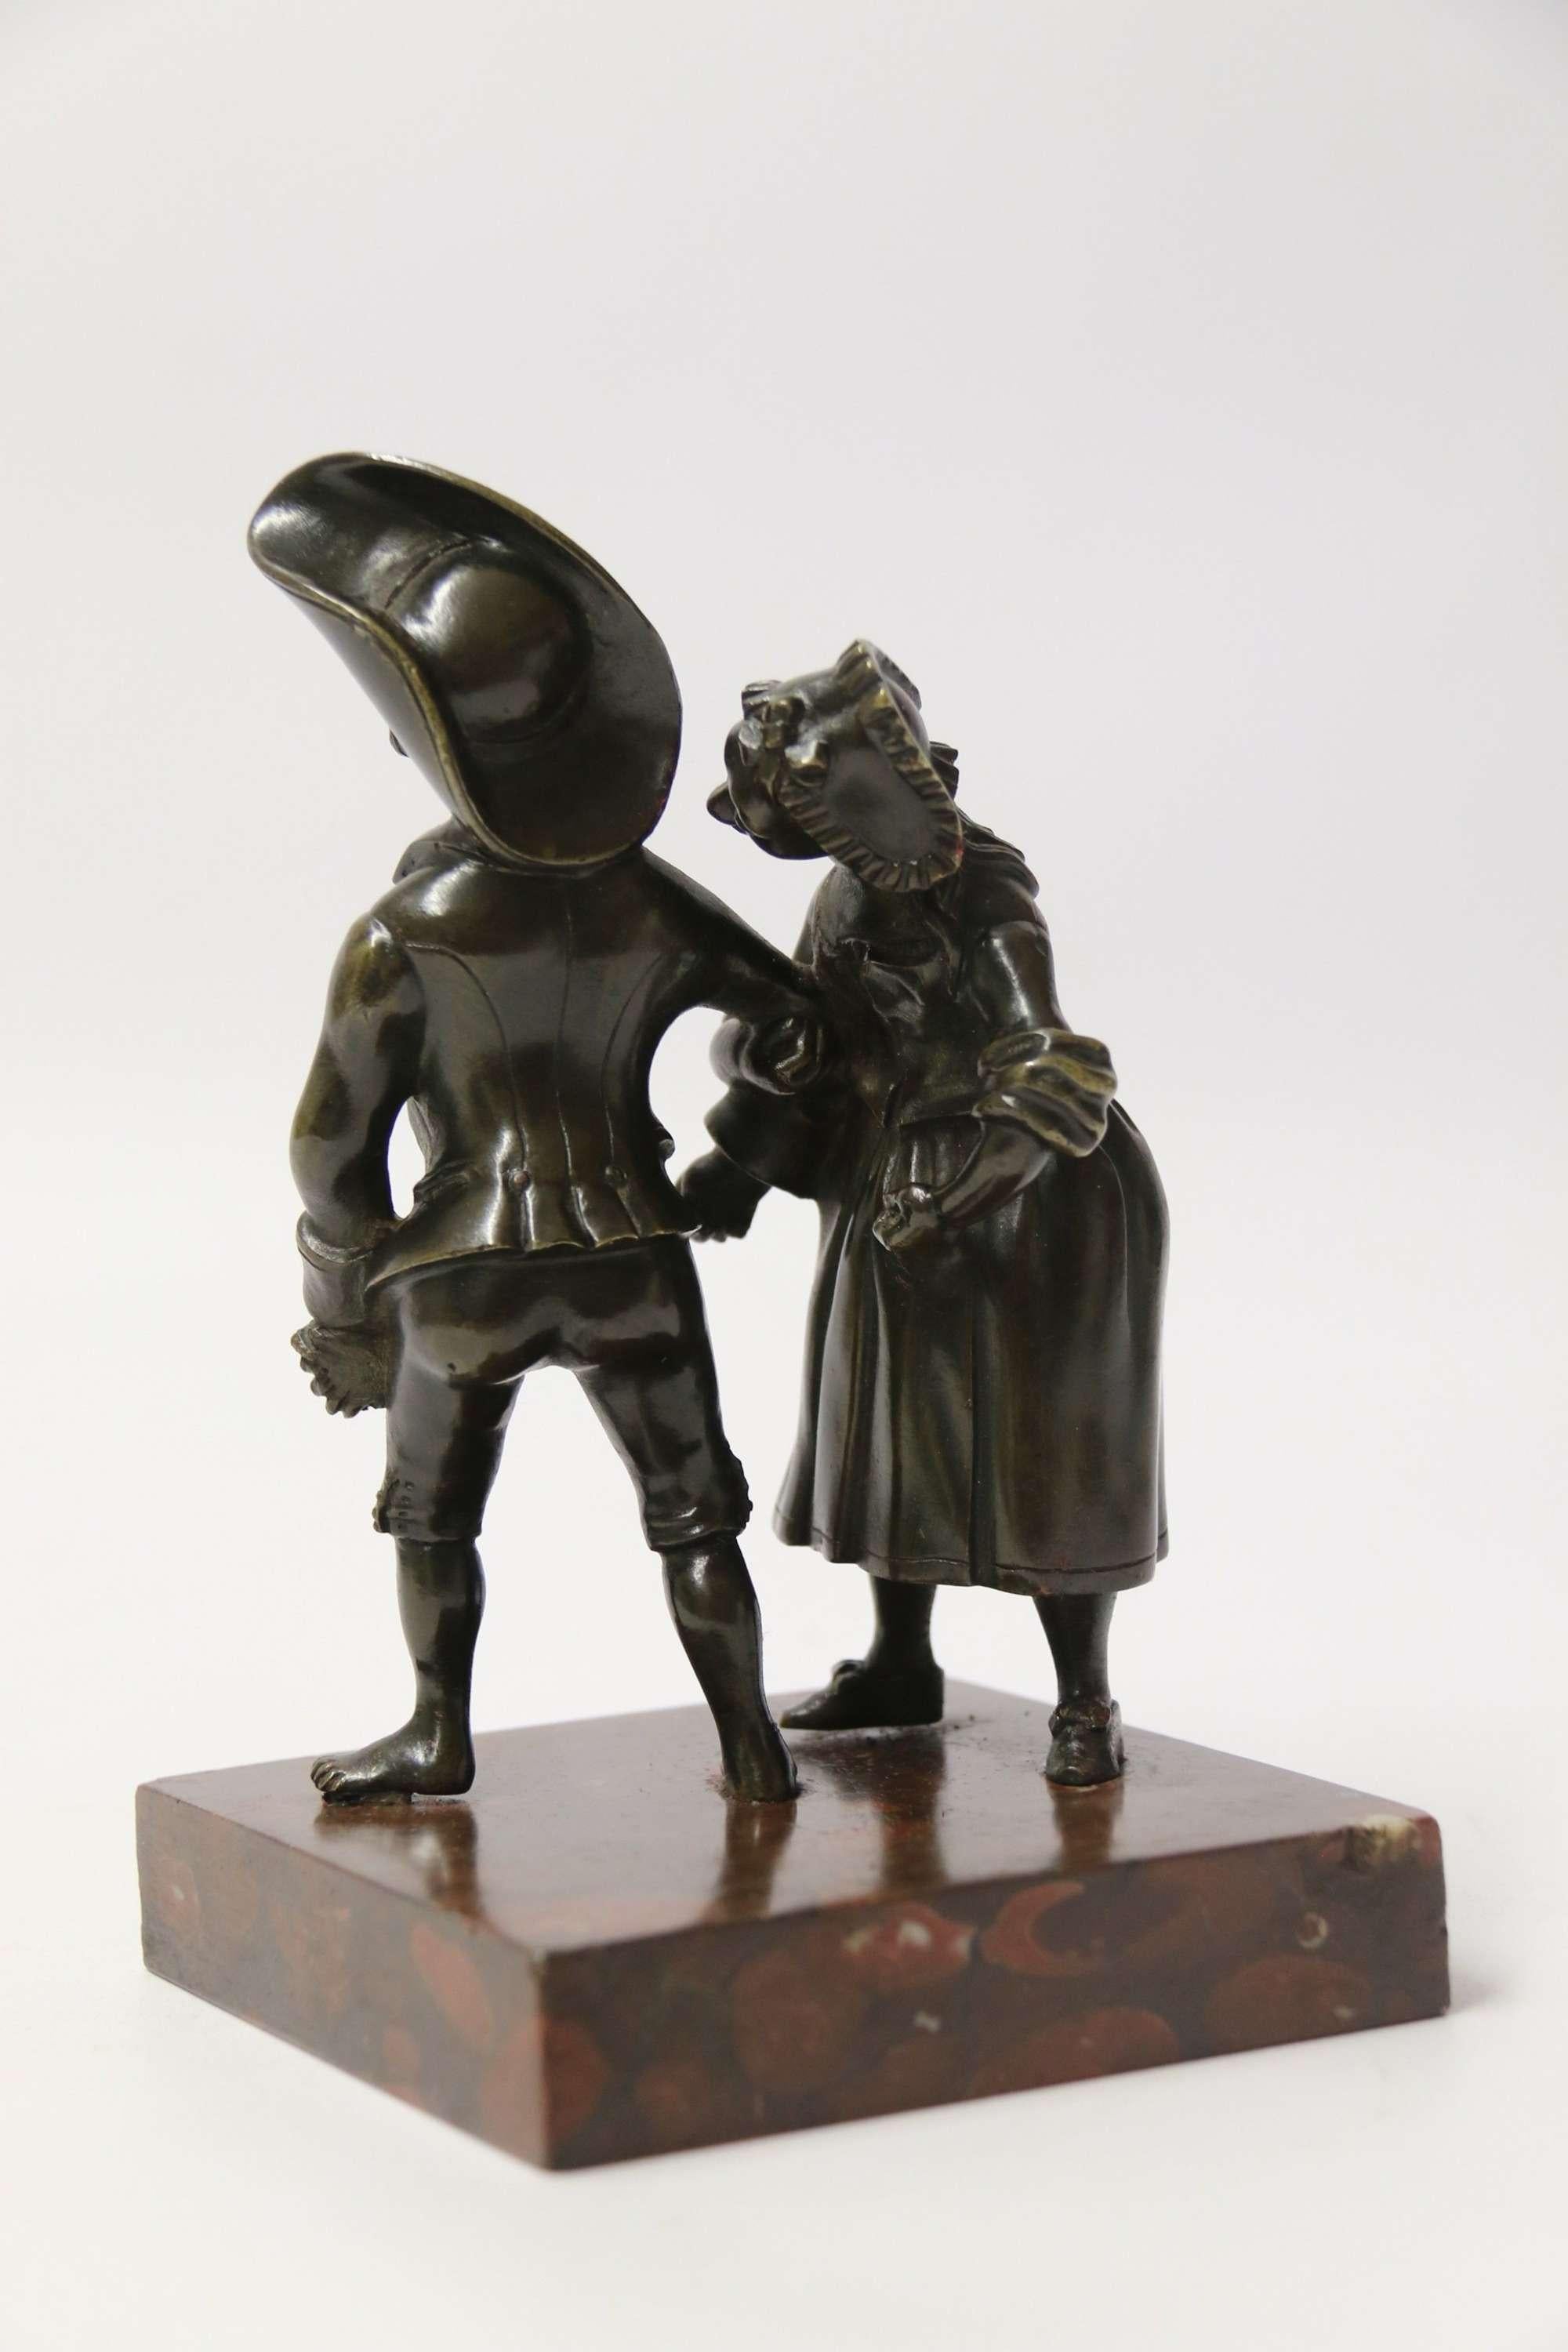 A most amusing 19th C Italian bronze study of a young couple dancing.

This unusual fine quality Italian bronze depicts an 18th-century rural young man and woman dressed typically for the time. Both obviously having had a good time and far too